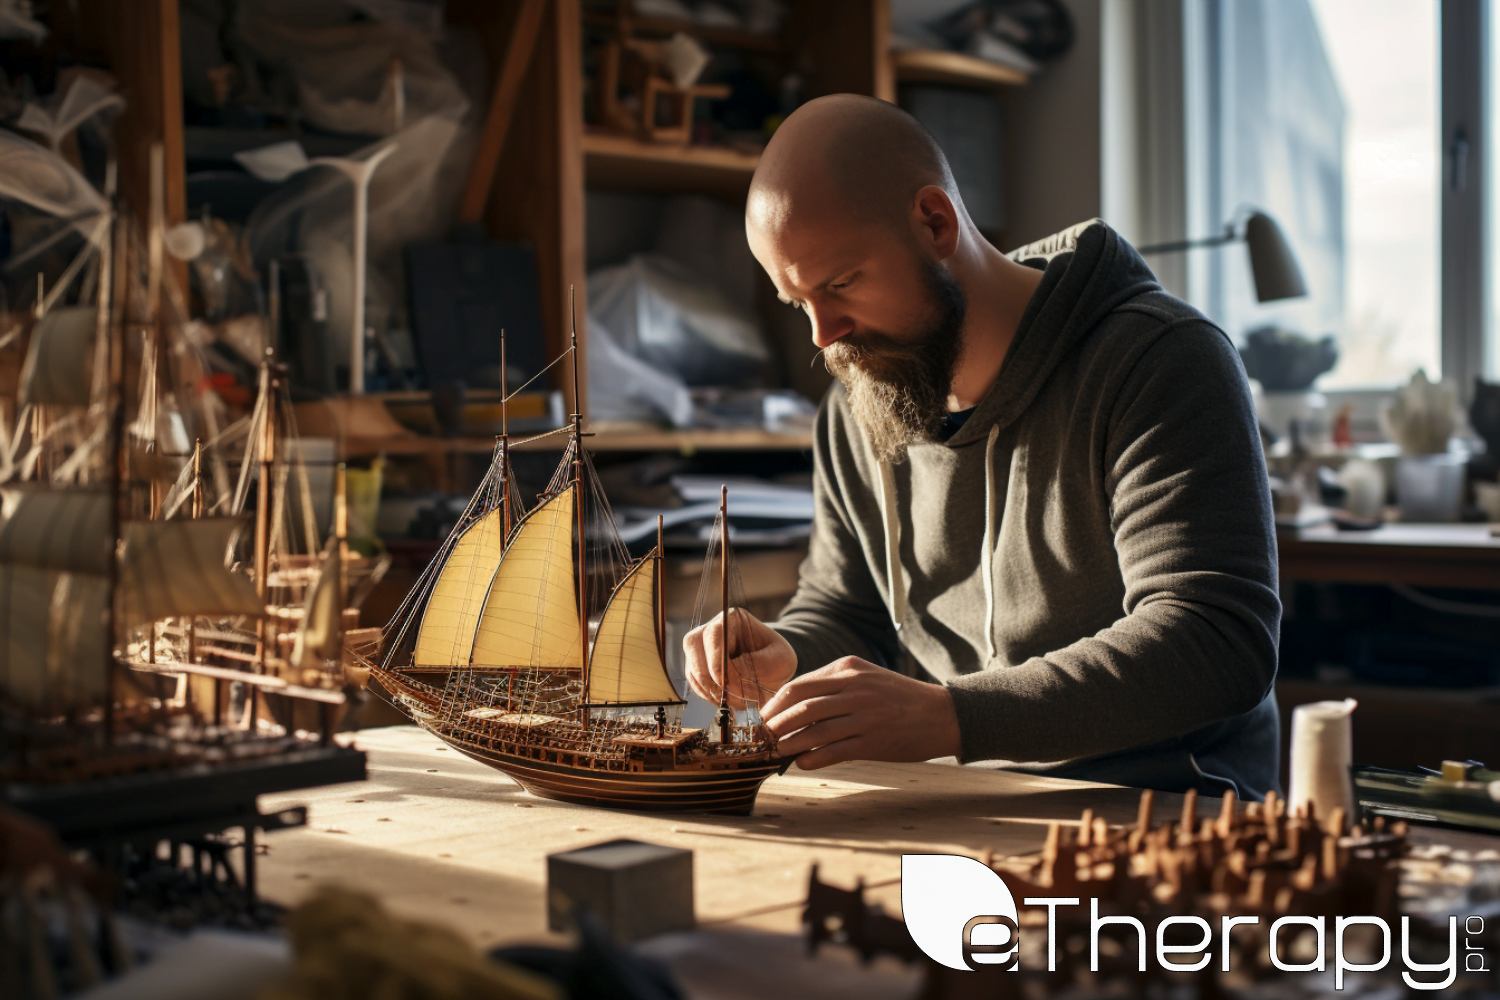 An individual in a quiet, sunlit room, assembling a complex model ship - Intermittent Anger Disorder